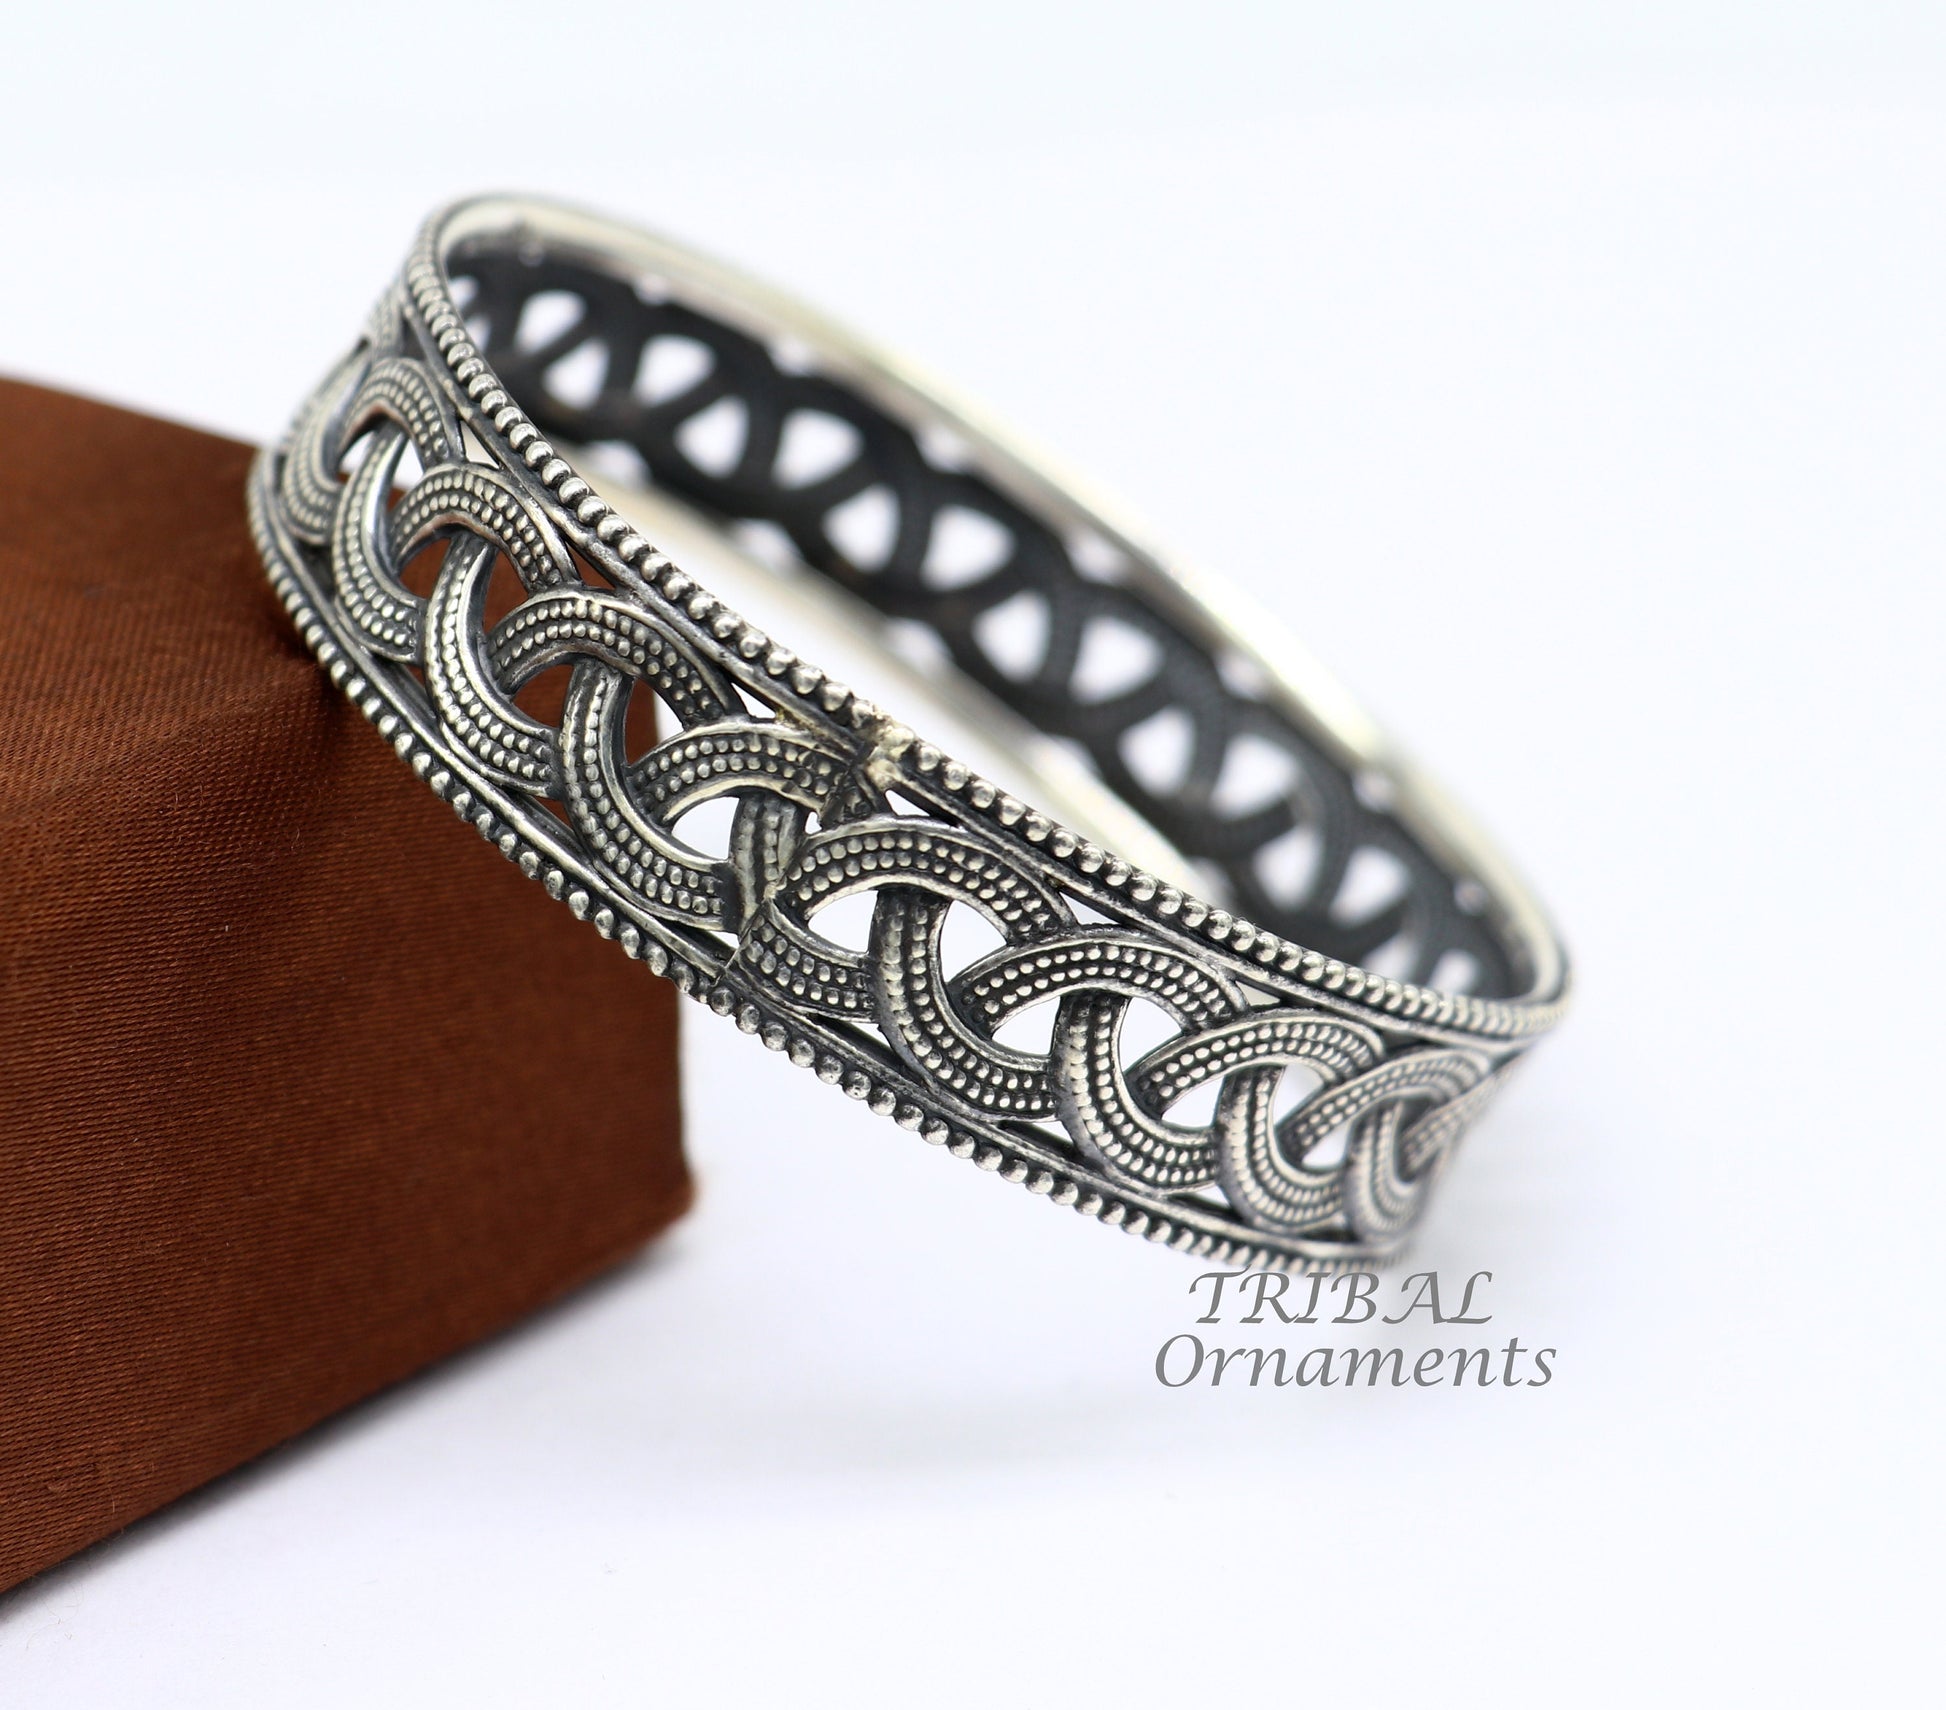 Elegant 925 sterling silver flower design unique style handmade bangle bracelet , best brides collection wedding jewelry from india nba334 - TRIBAL ORNAMENTS